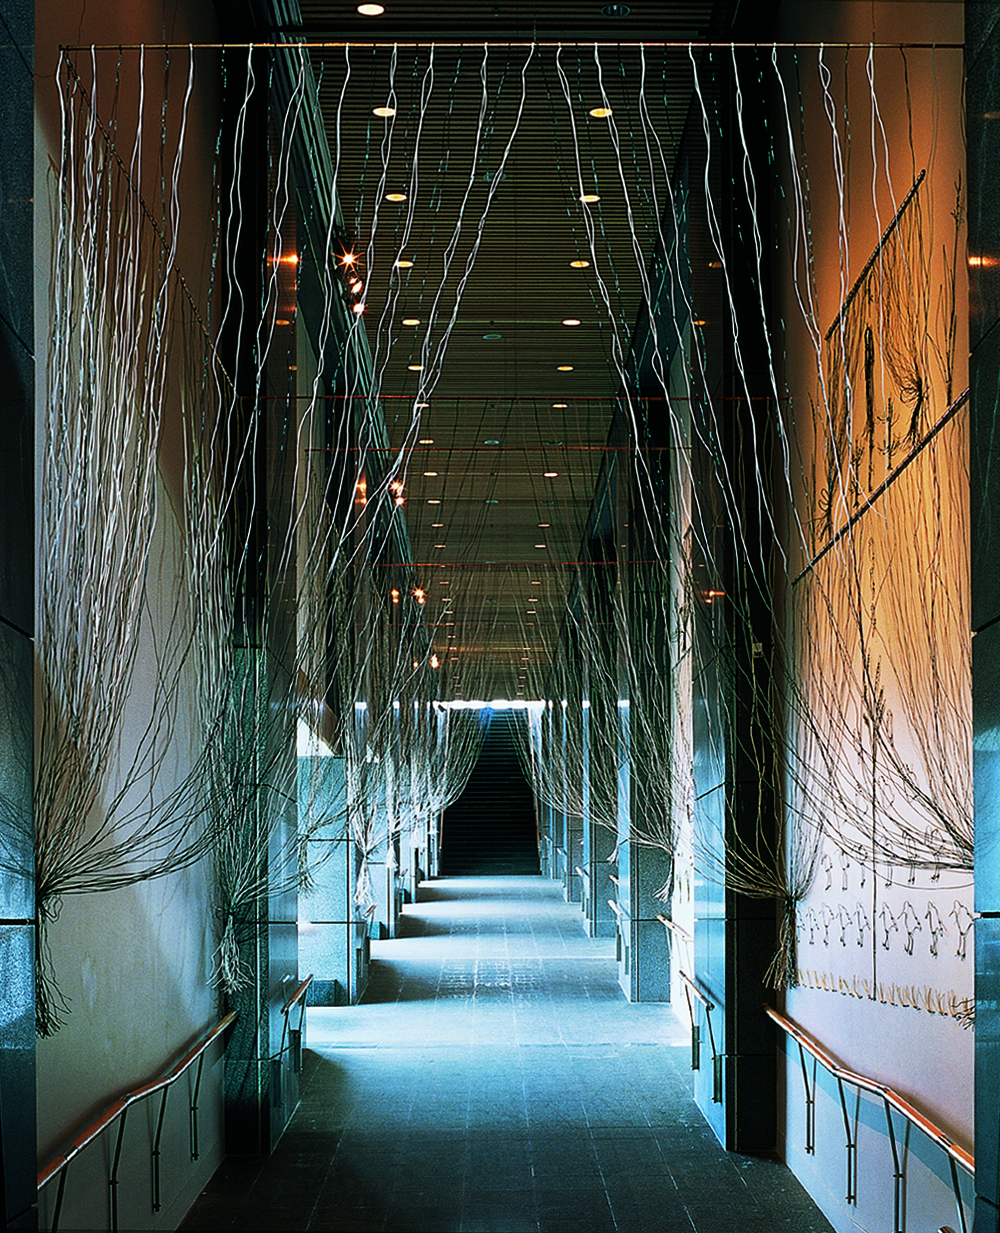 A long passageway with intermittent tall windows and a staircase at the end. There are silvery strings strung and pinned back like curtains along the passage.